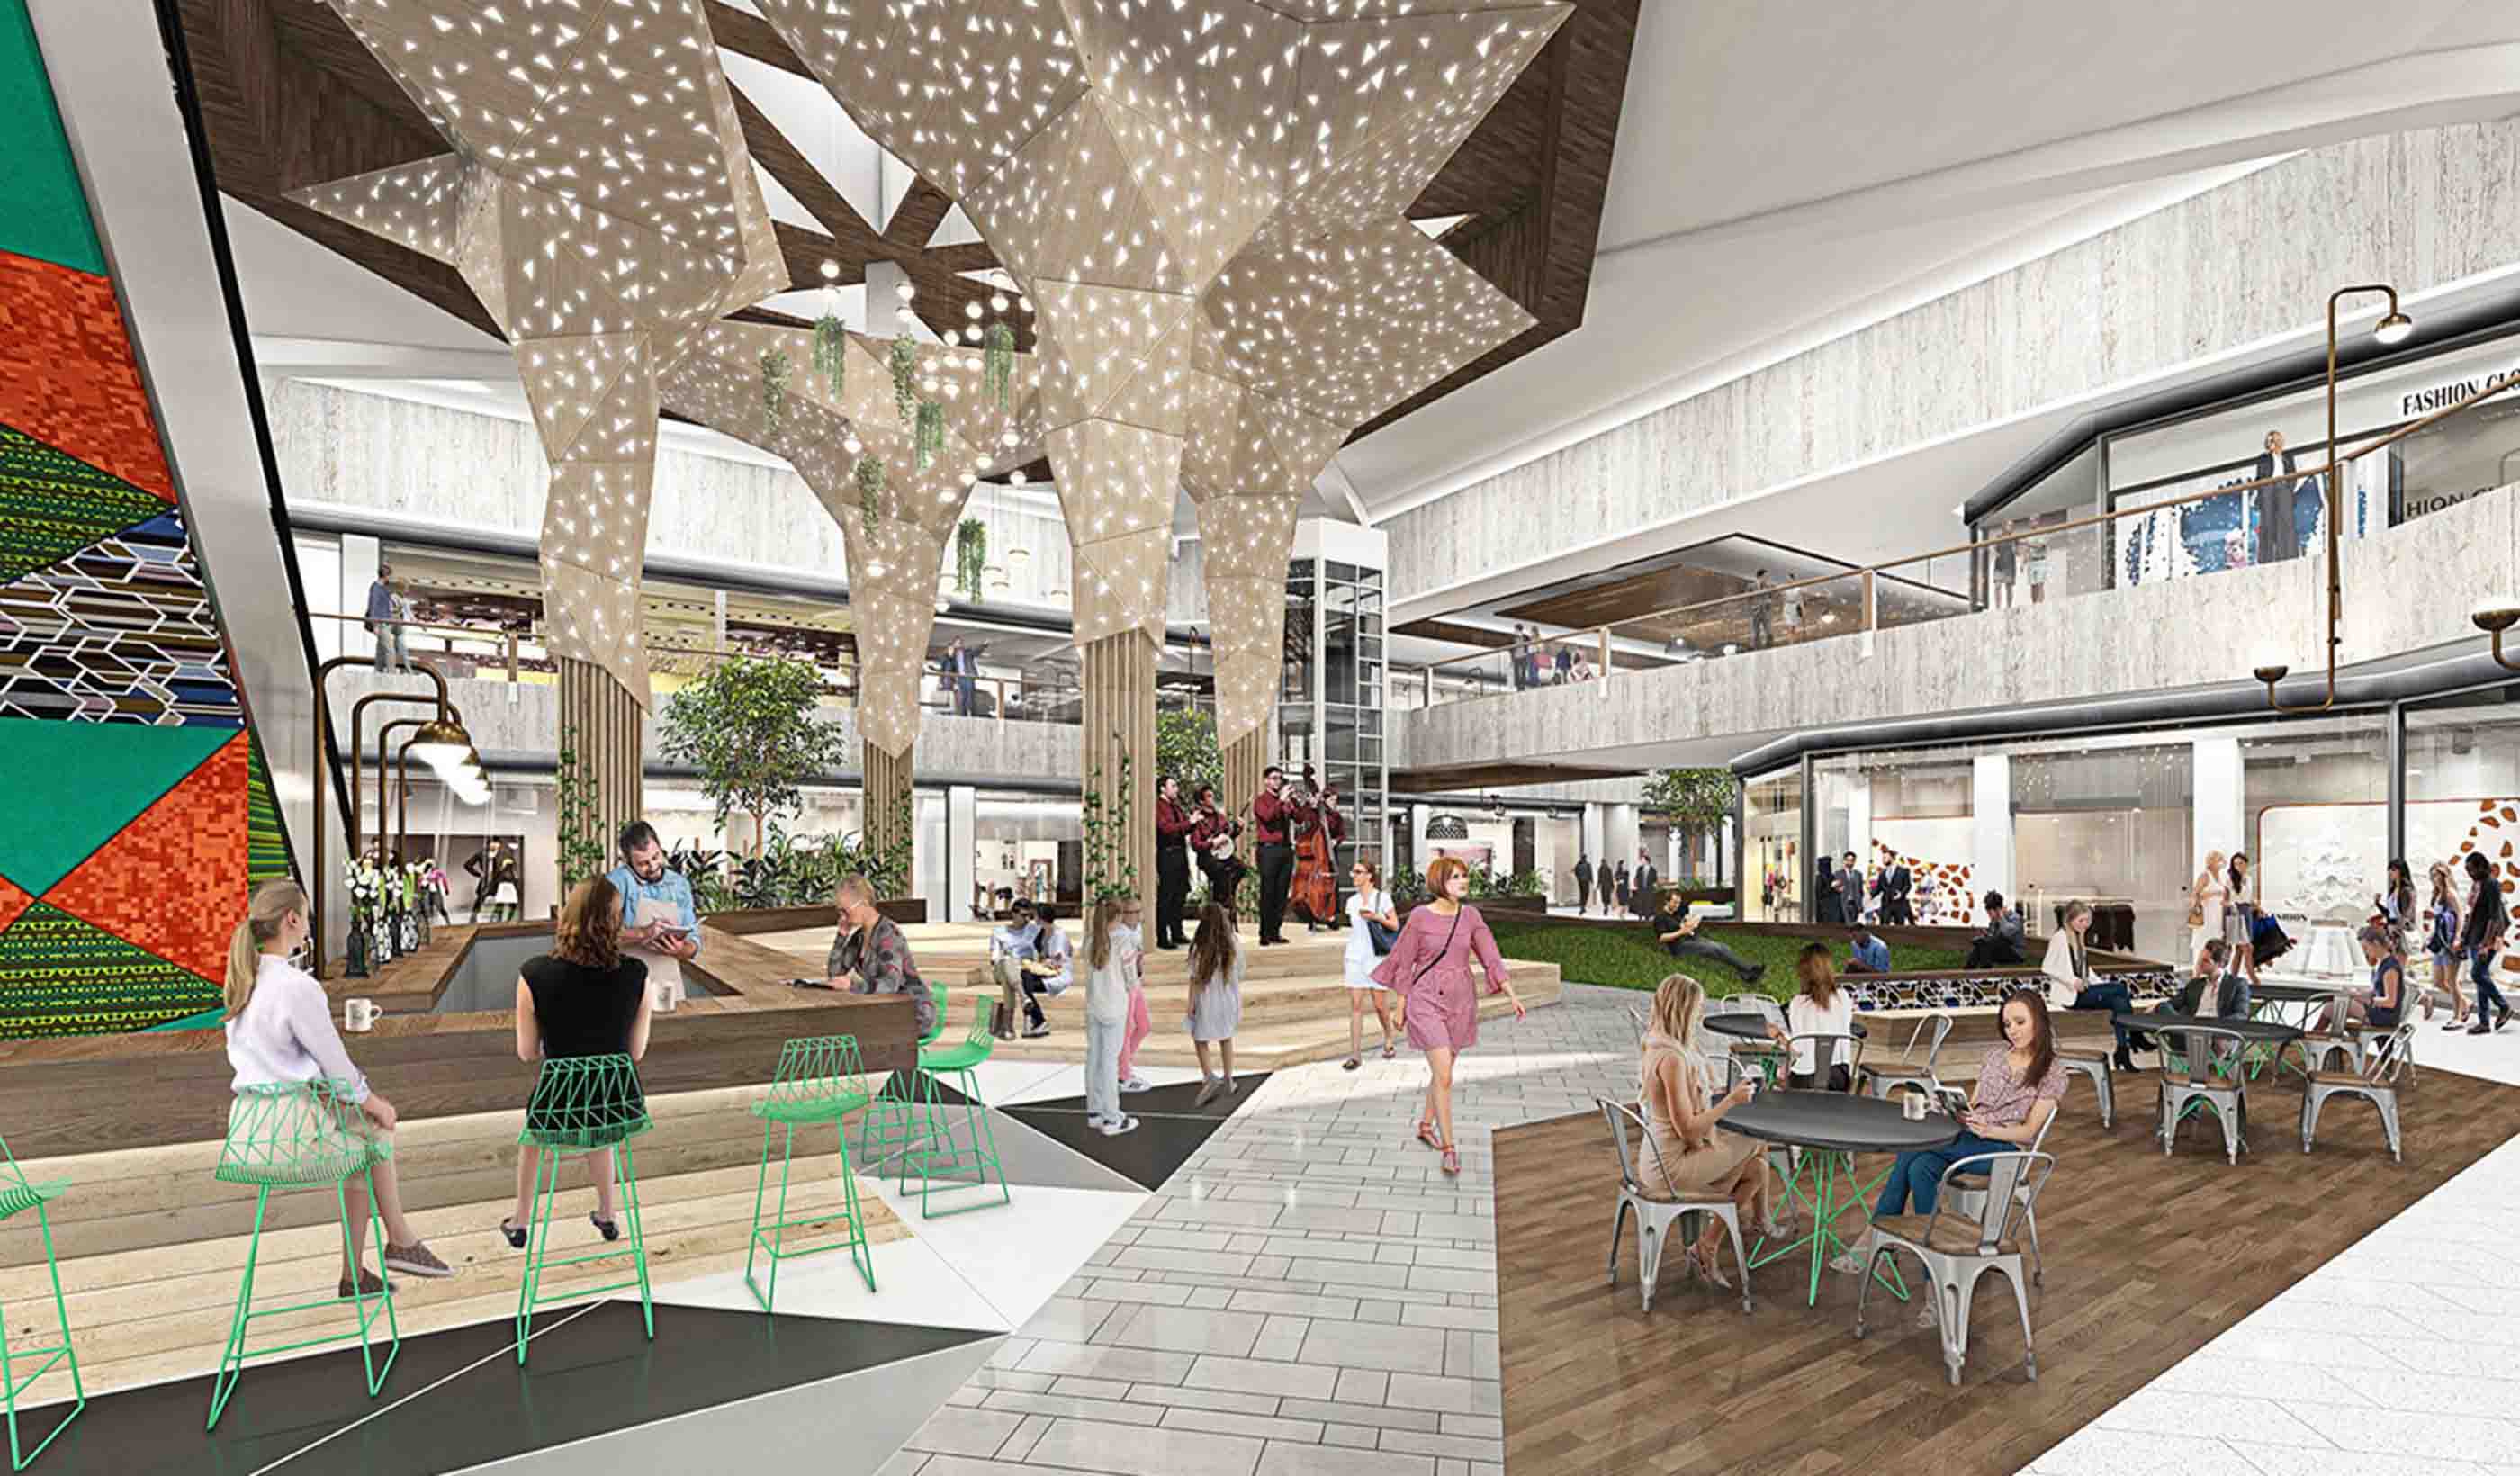 From the Design Quarterly: Meet me at the new mall—10 ways to make them cool